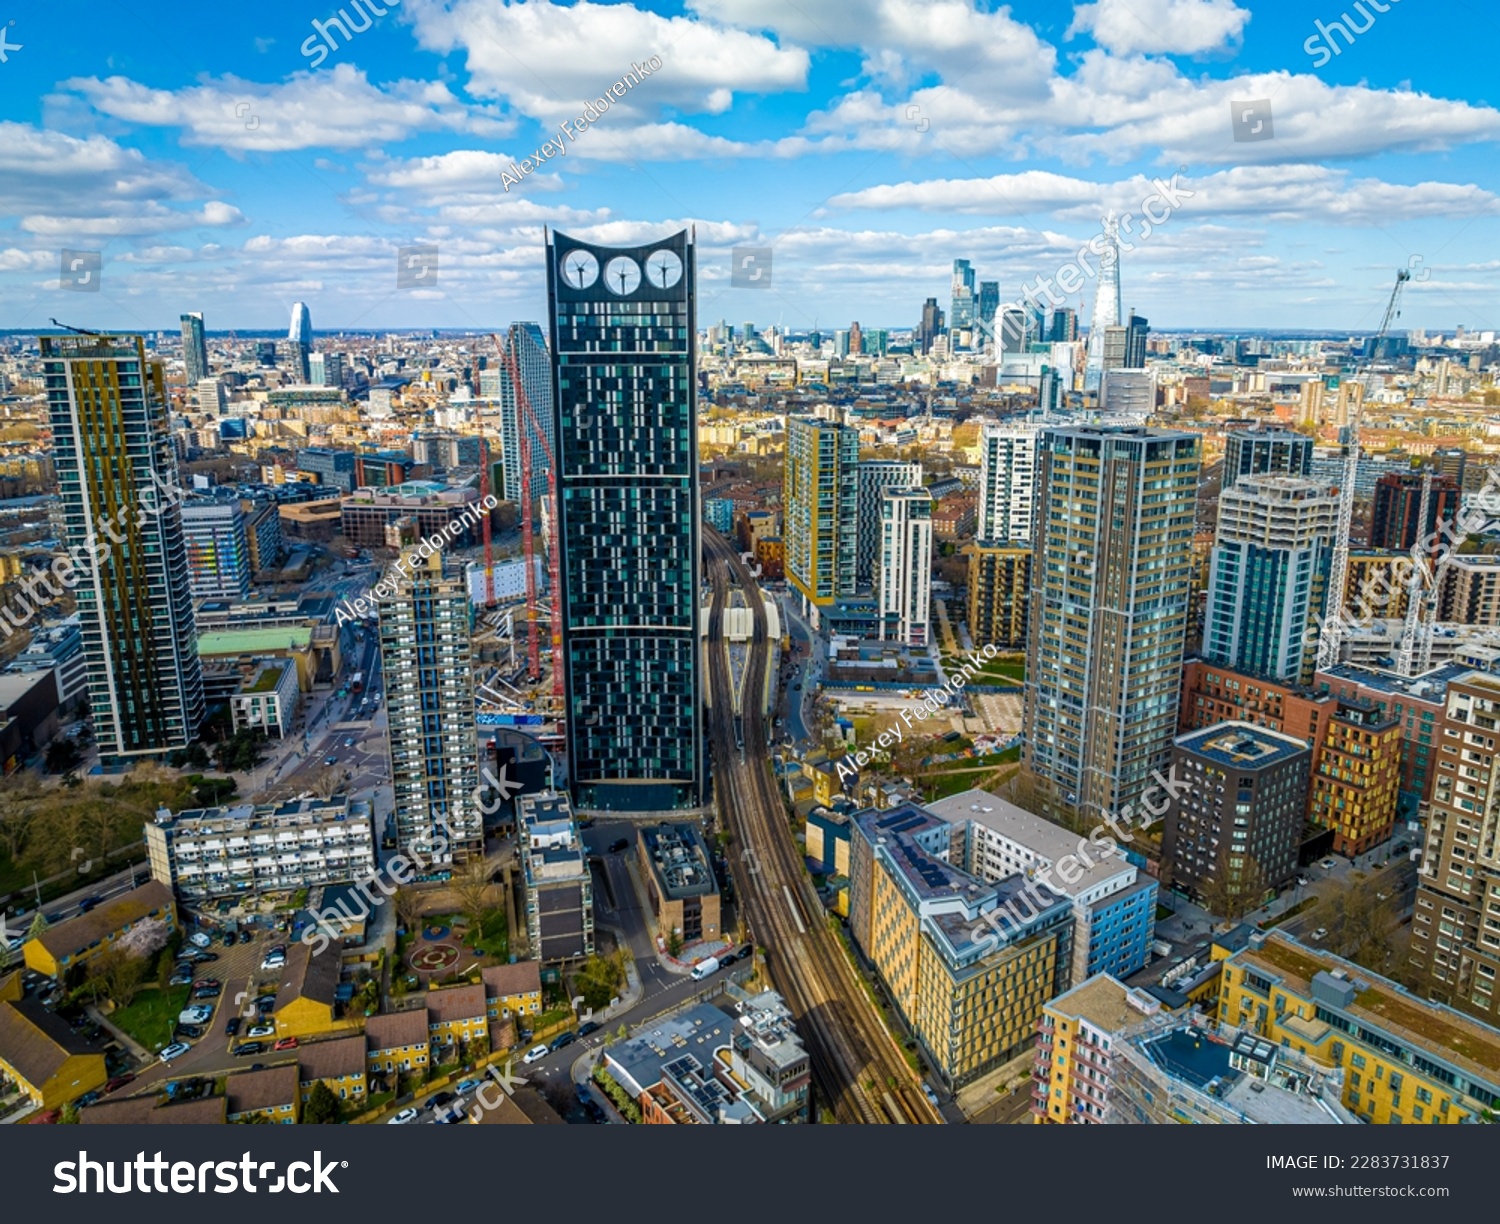 Aerial view of Strata tower central London from South bank, UK #2283731837